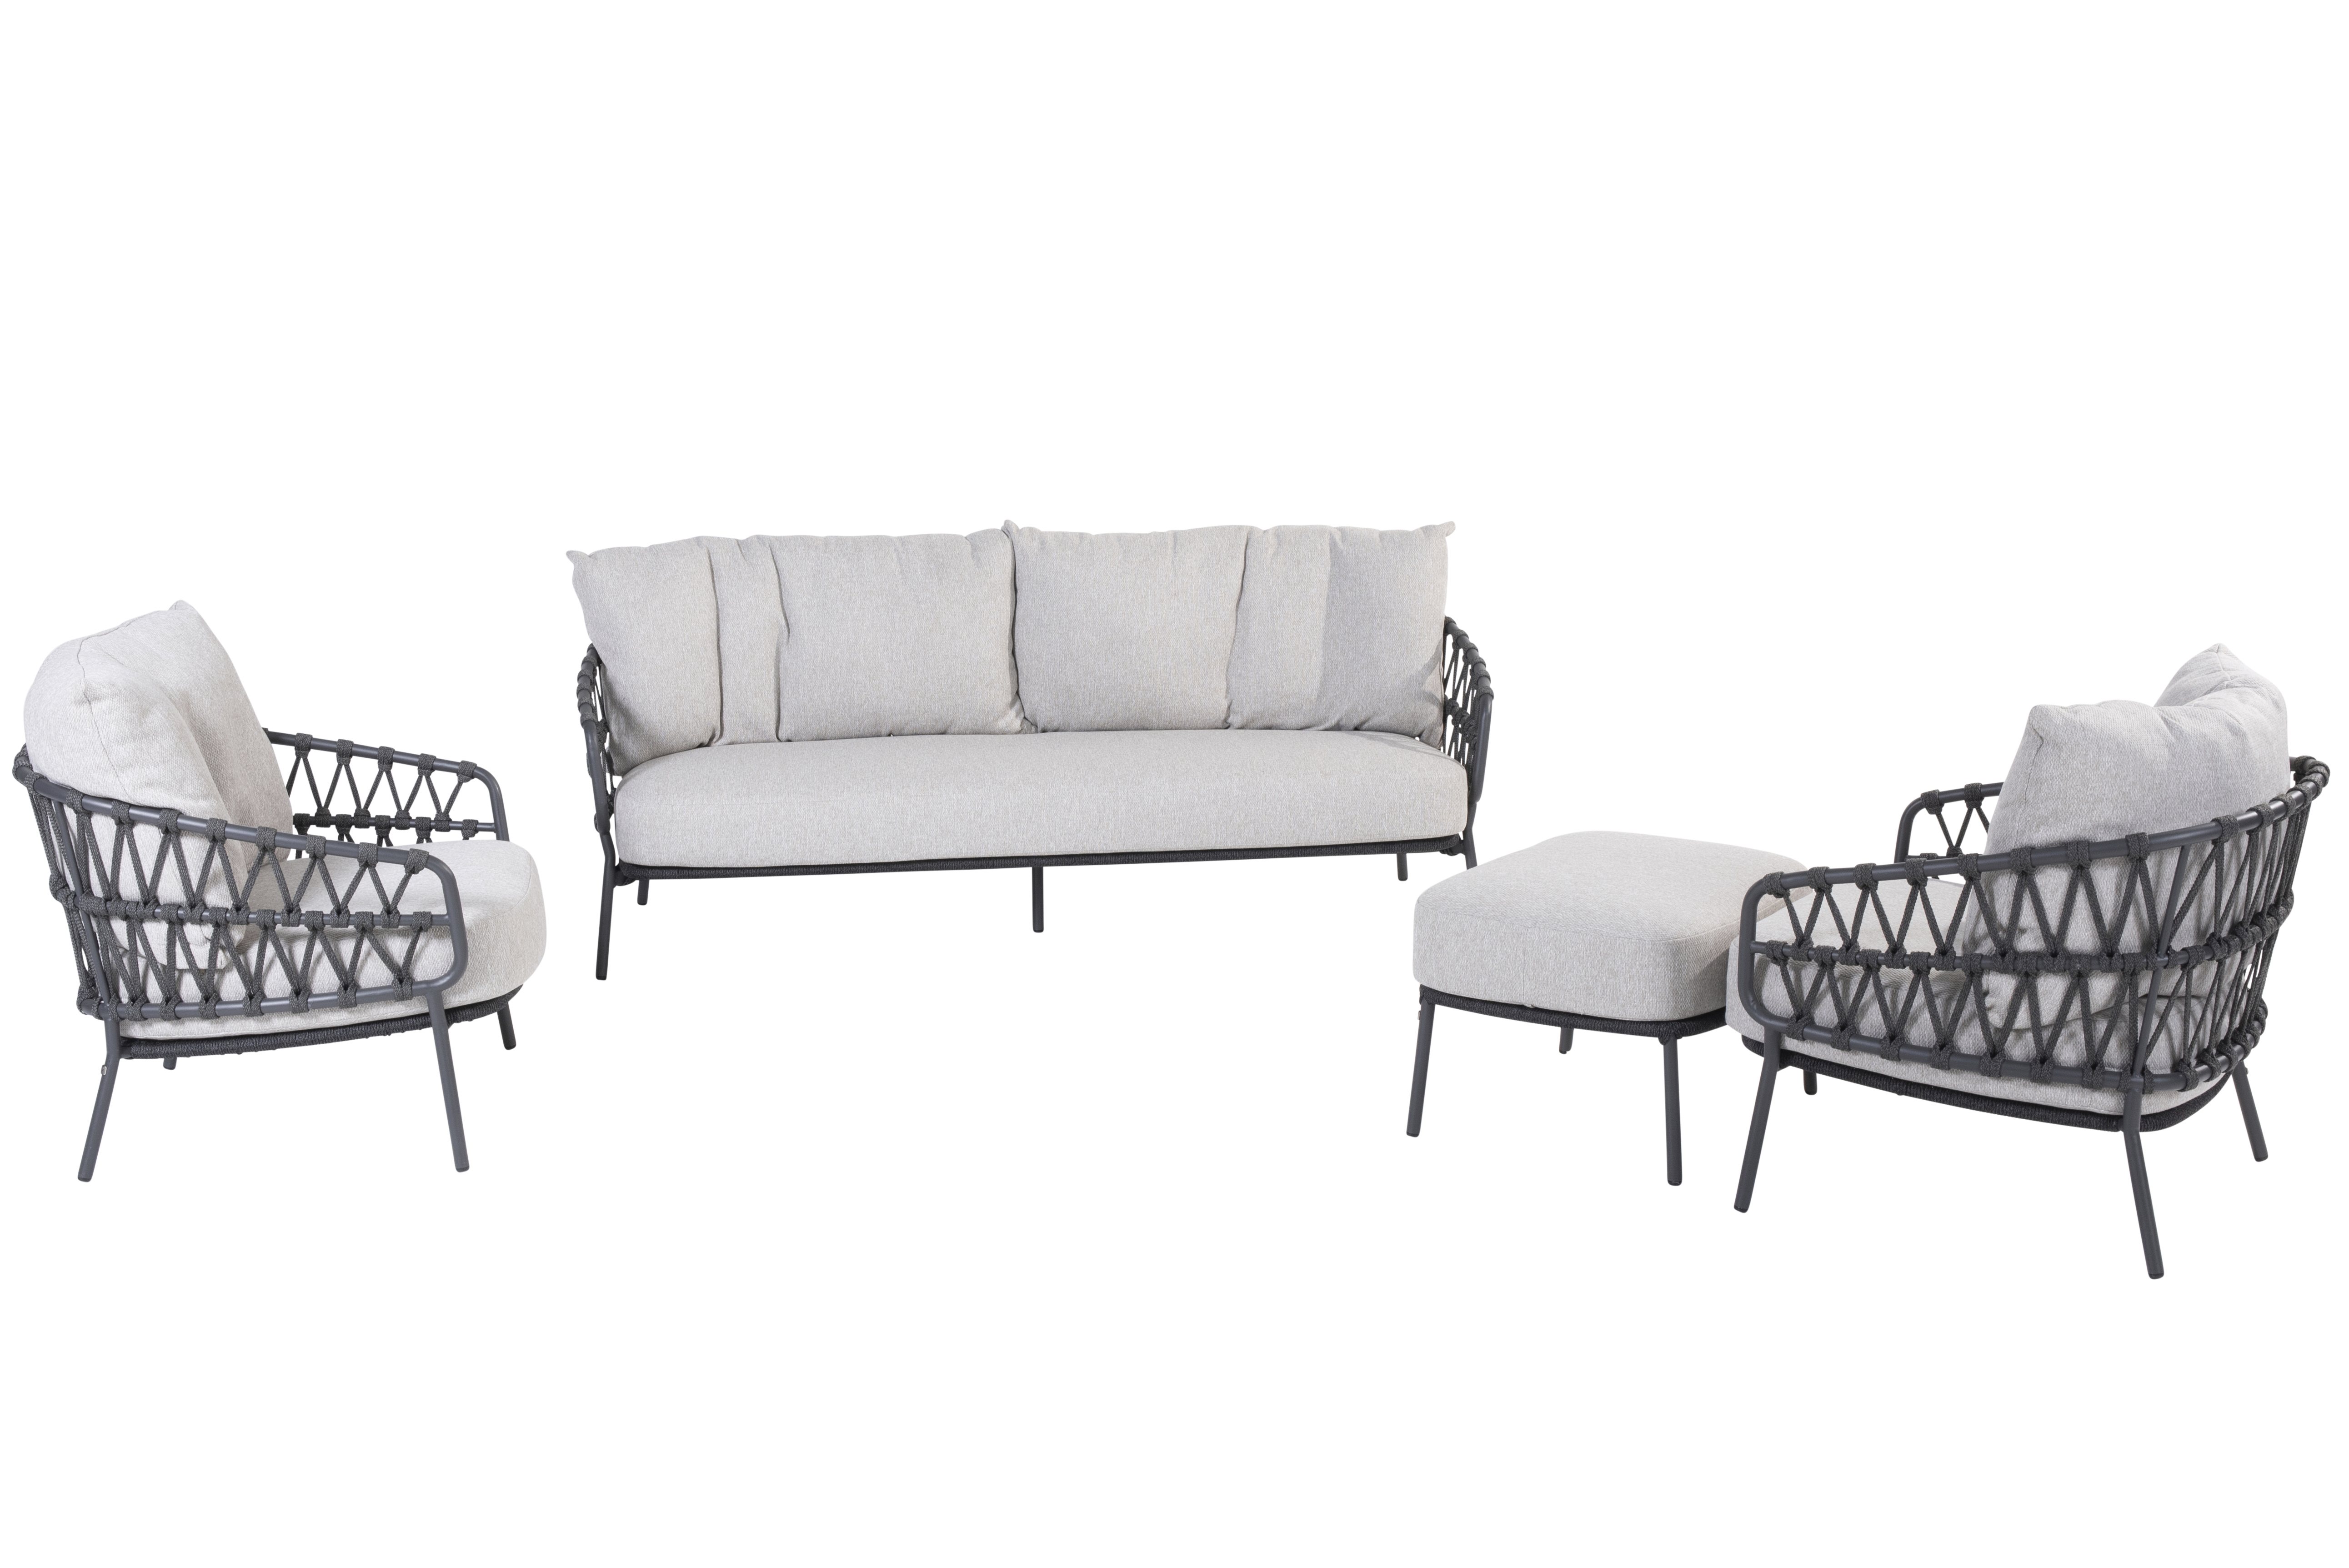 213891-213892-213893_ Calpi living set and footstool without table 02